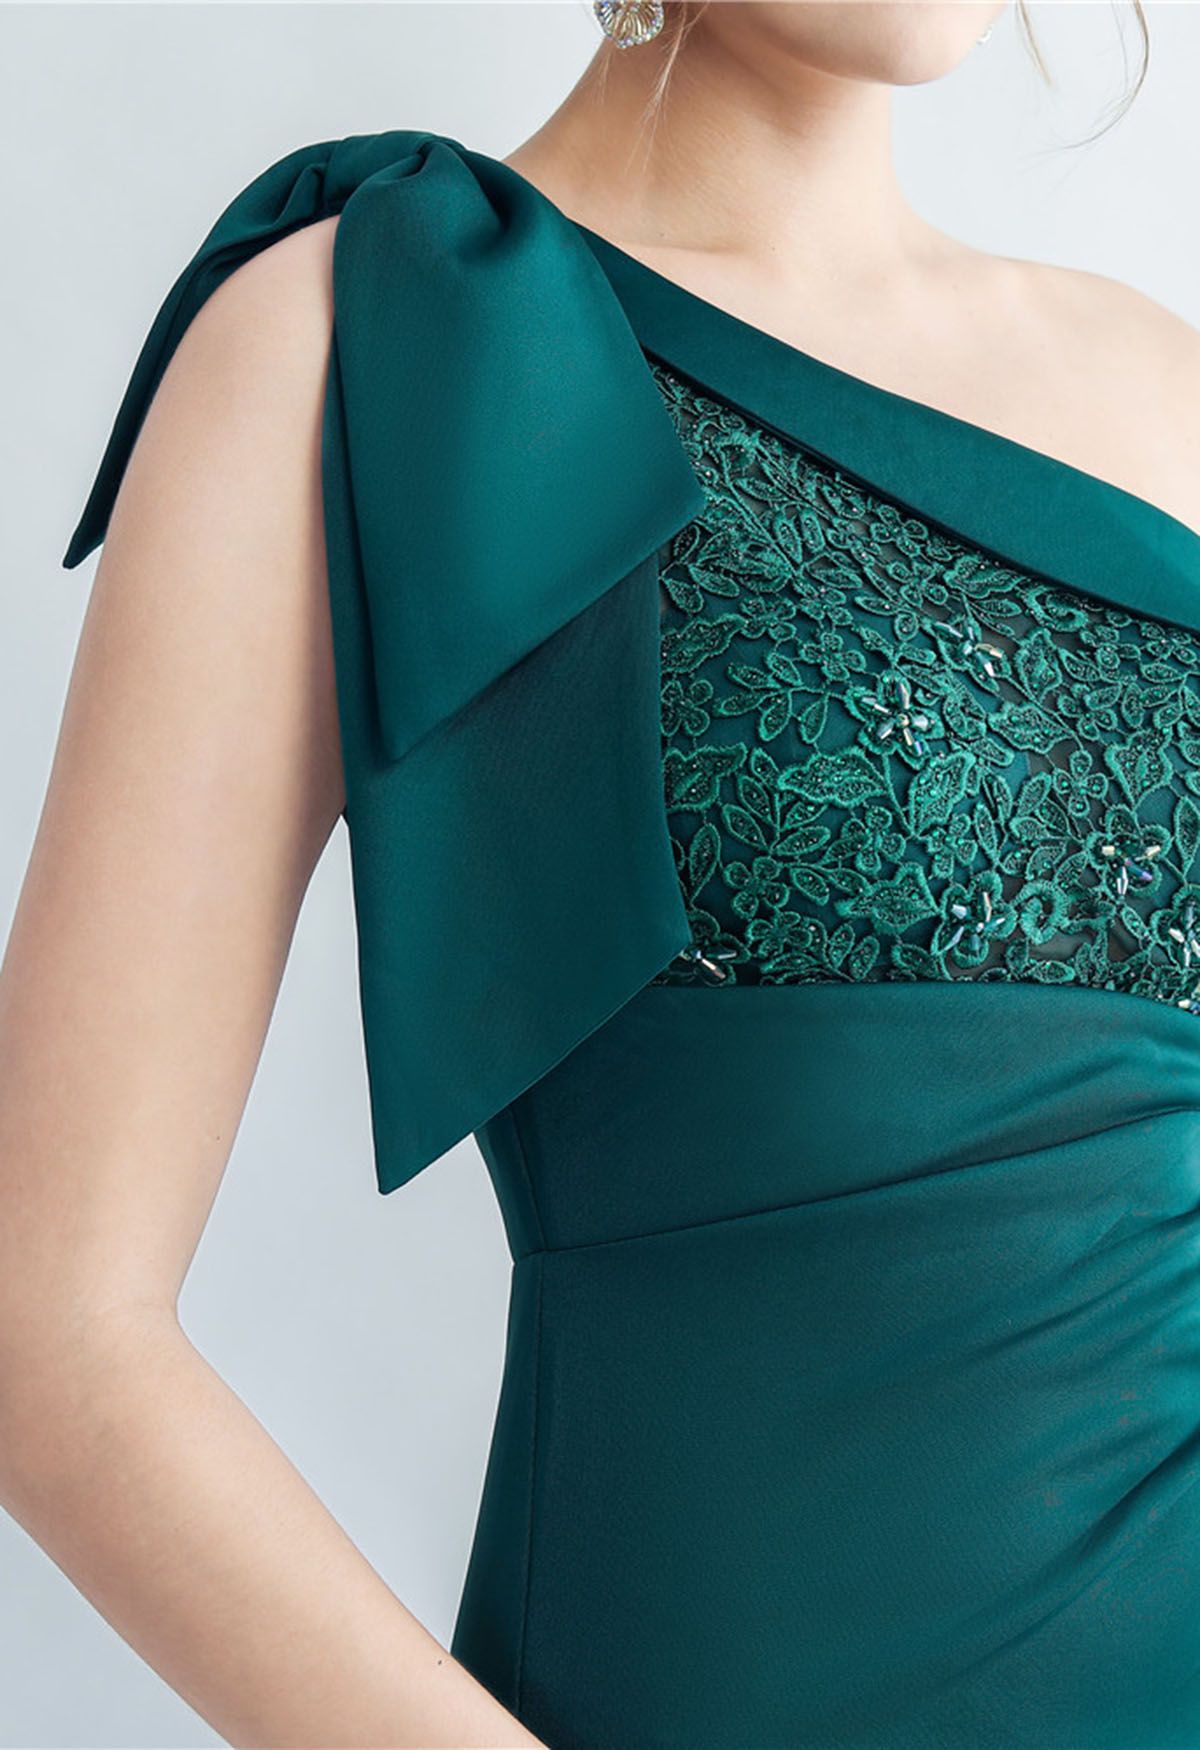 Bowknot One-Shoulder Embroidered Split Gown in Emerald